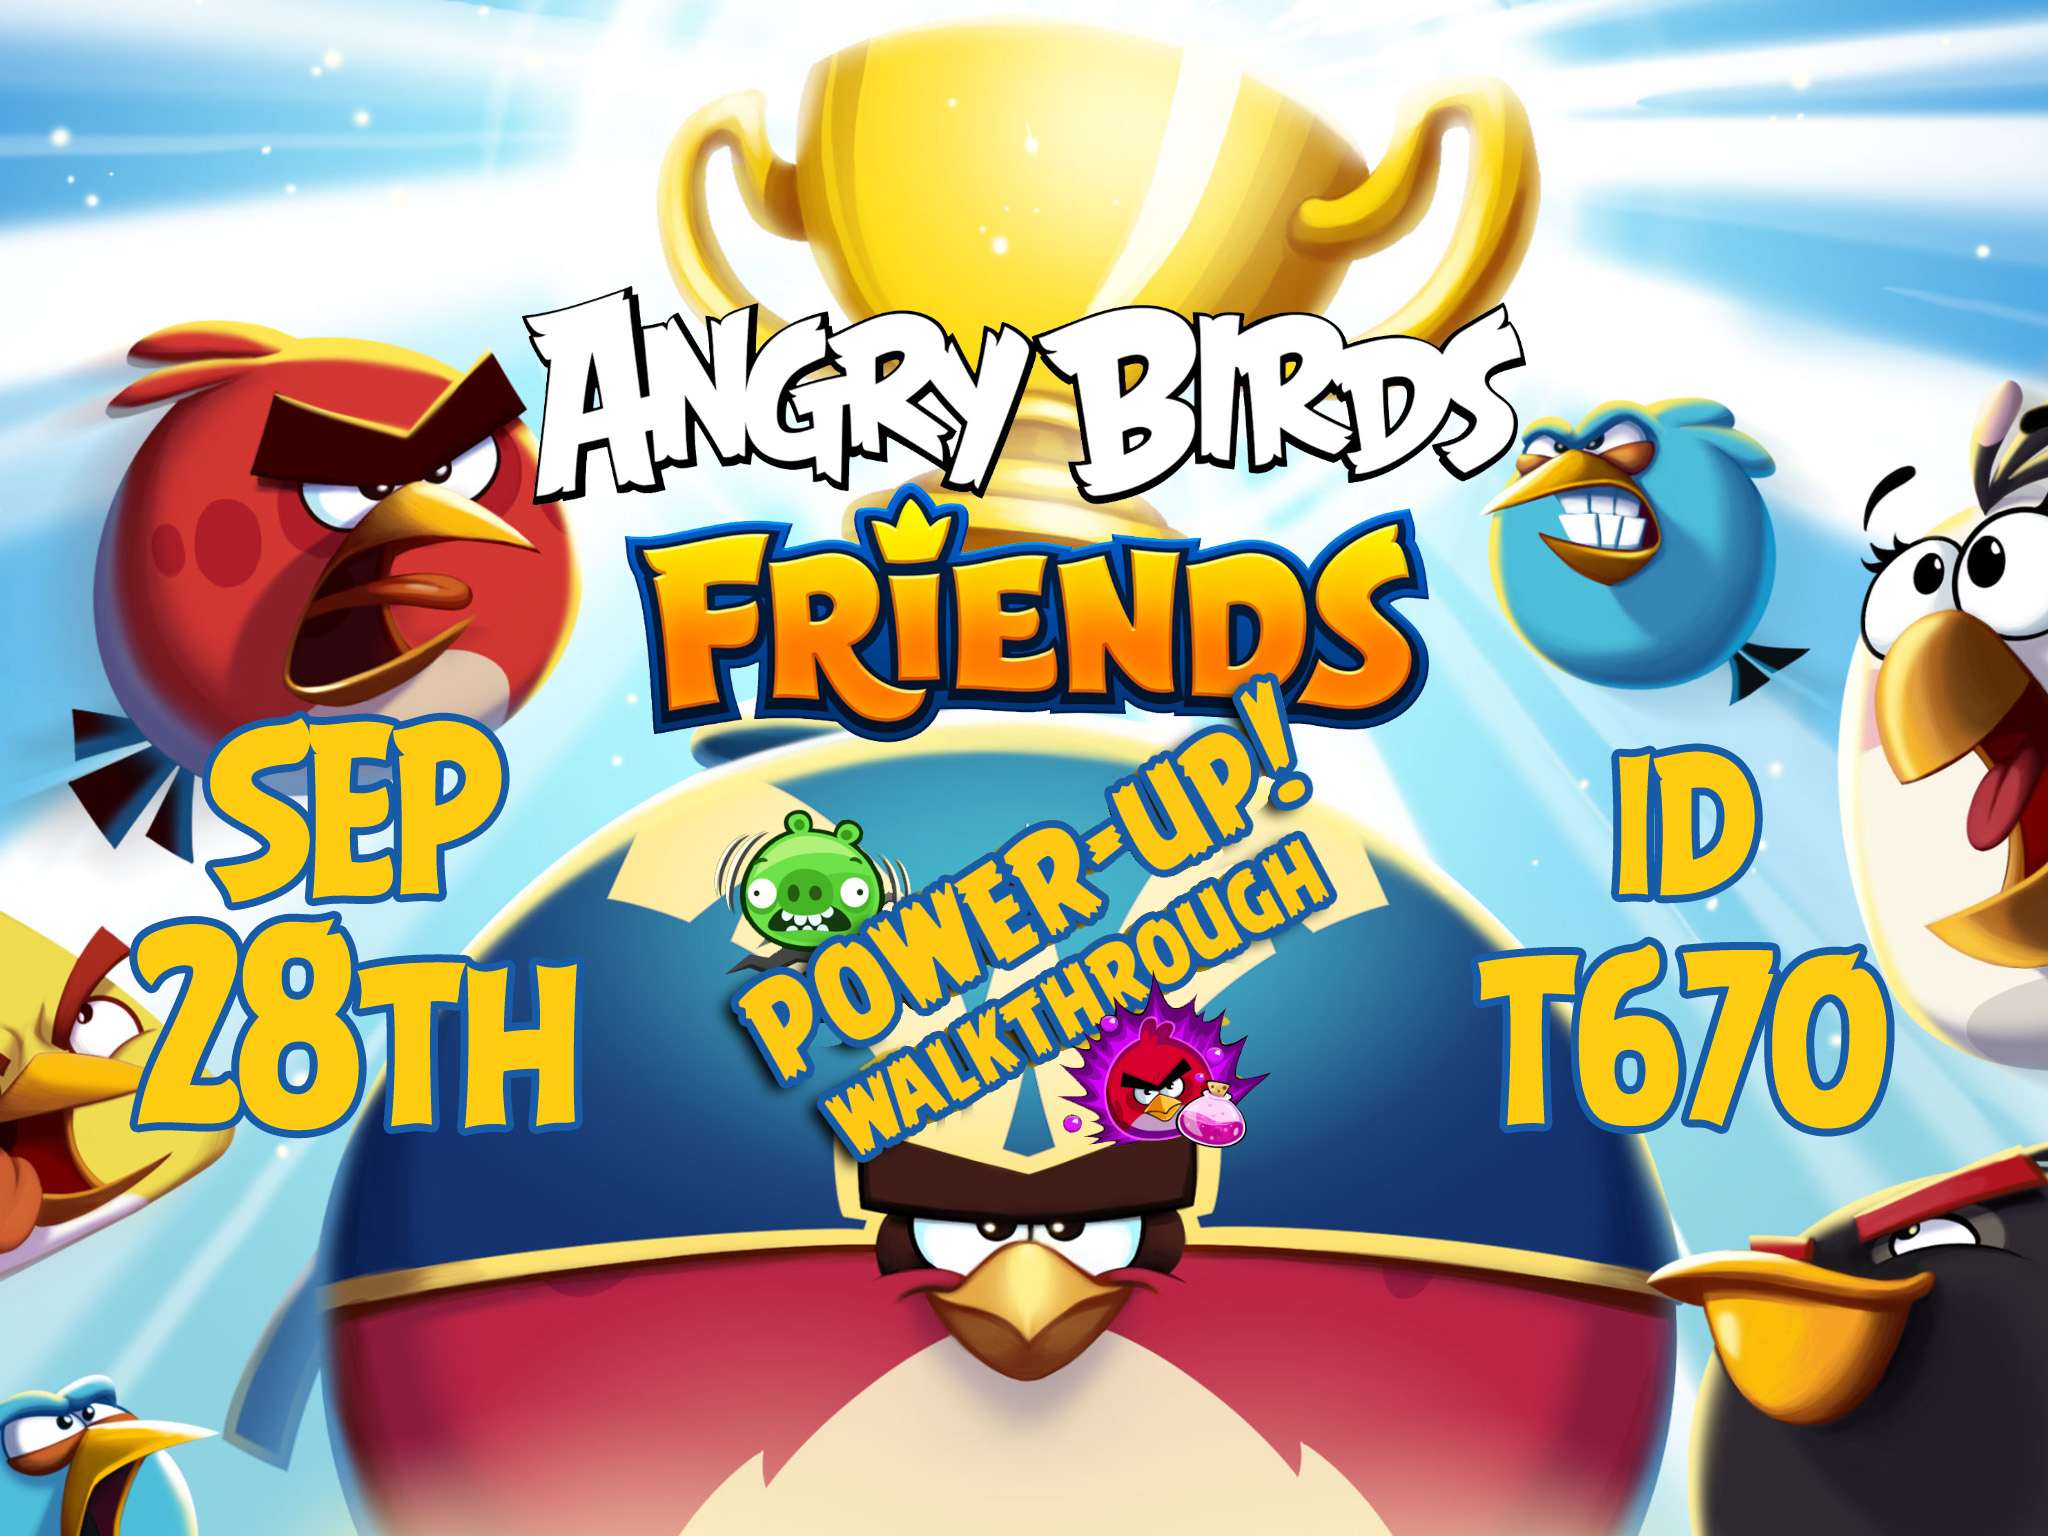 Angry-Birds-Friends-Tournament-T670-Feature-Image-PU